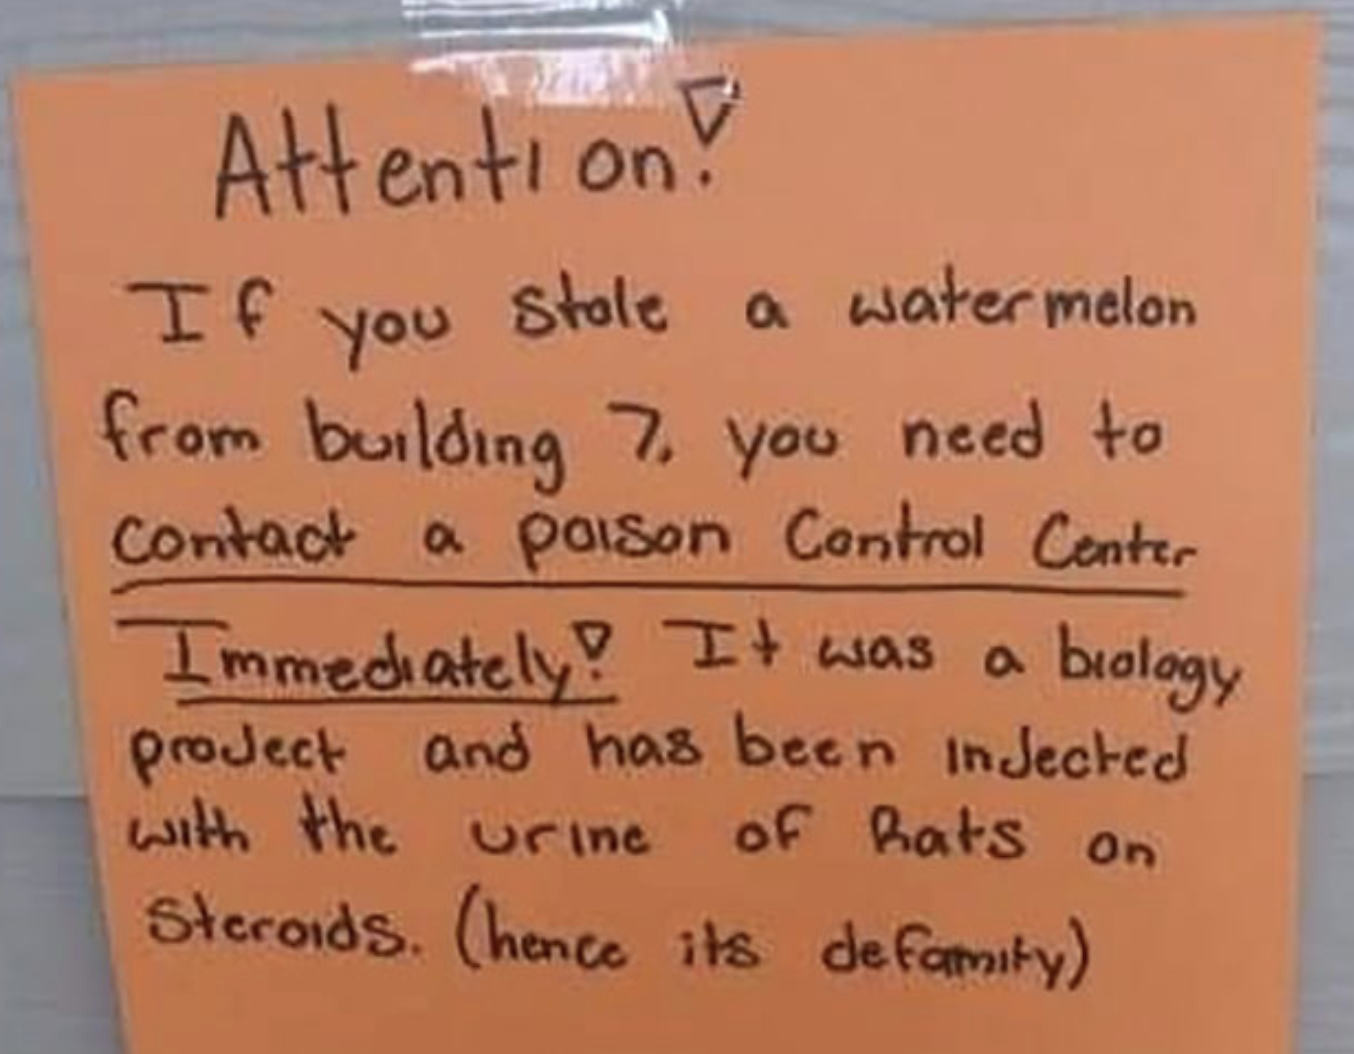 attention, if you stole a watermelon from building 7 you need to contact poison control it was a biology project and has been injected with urine